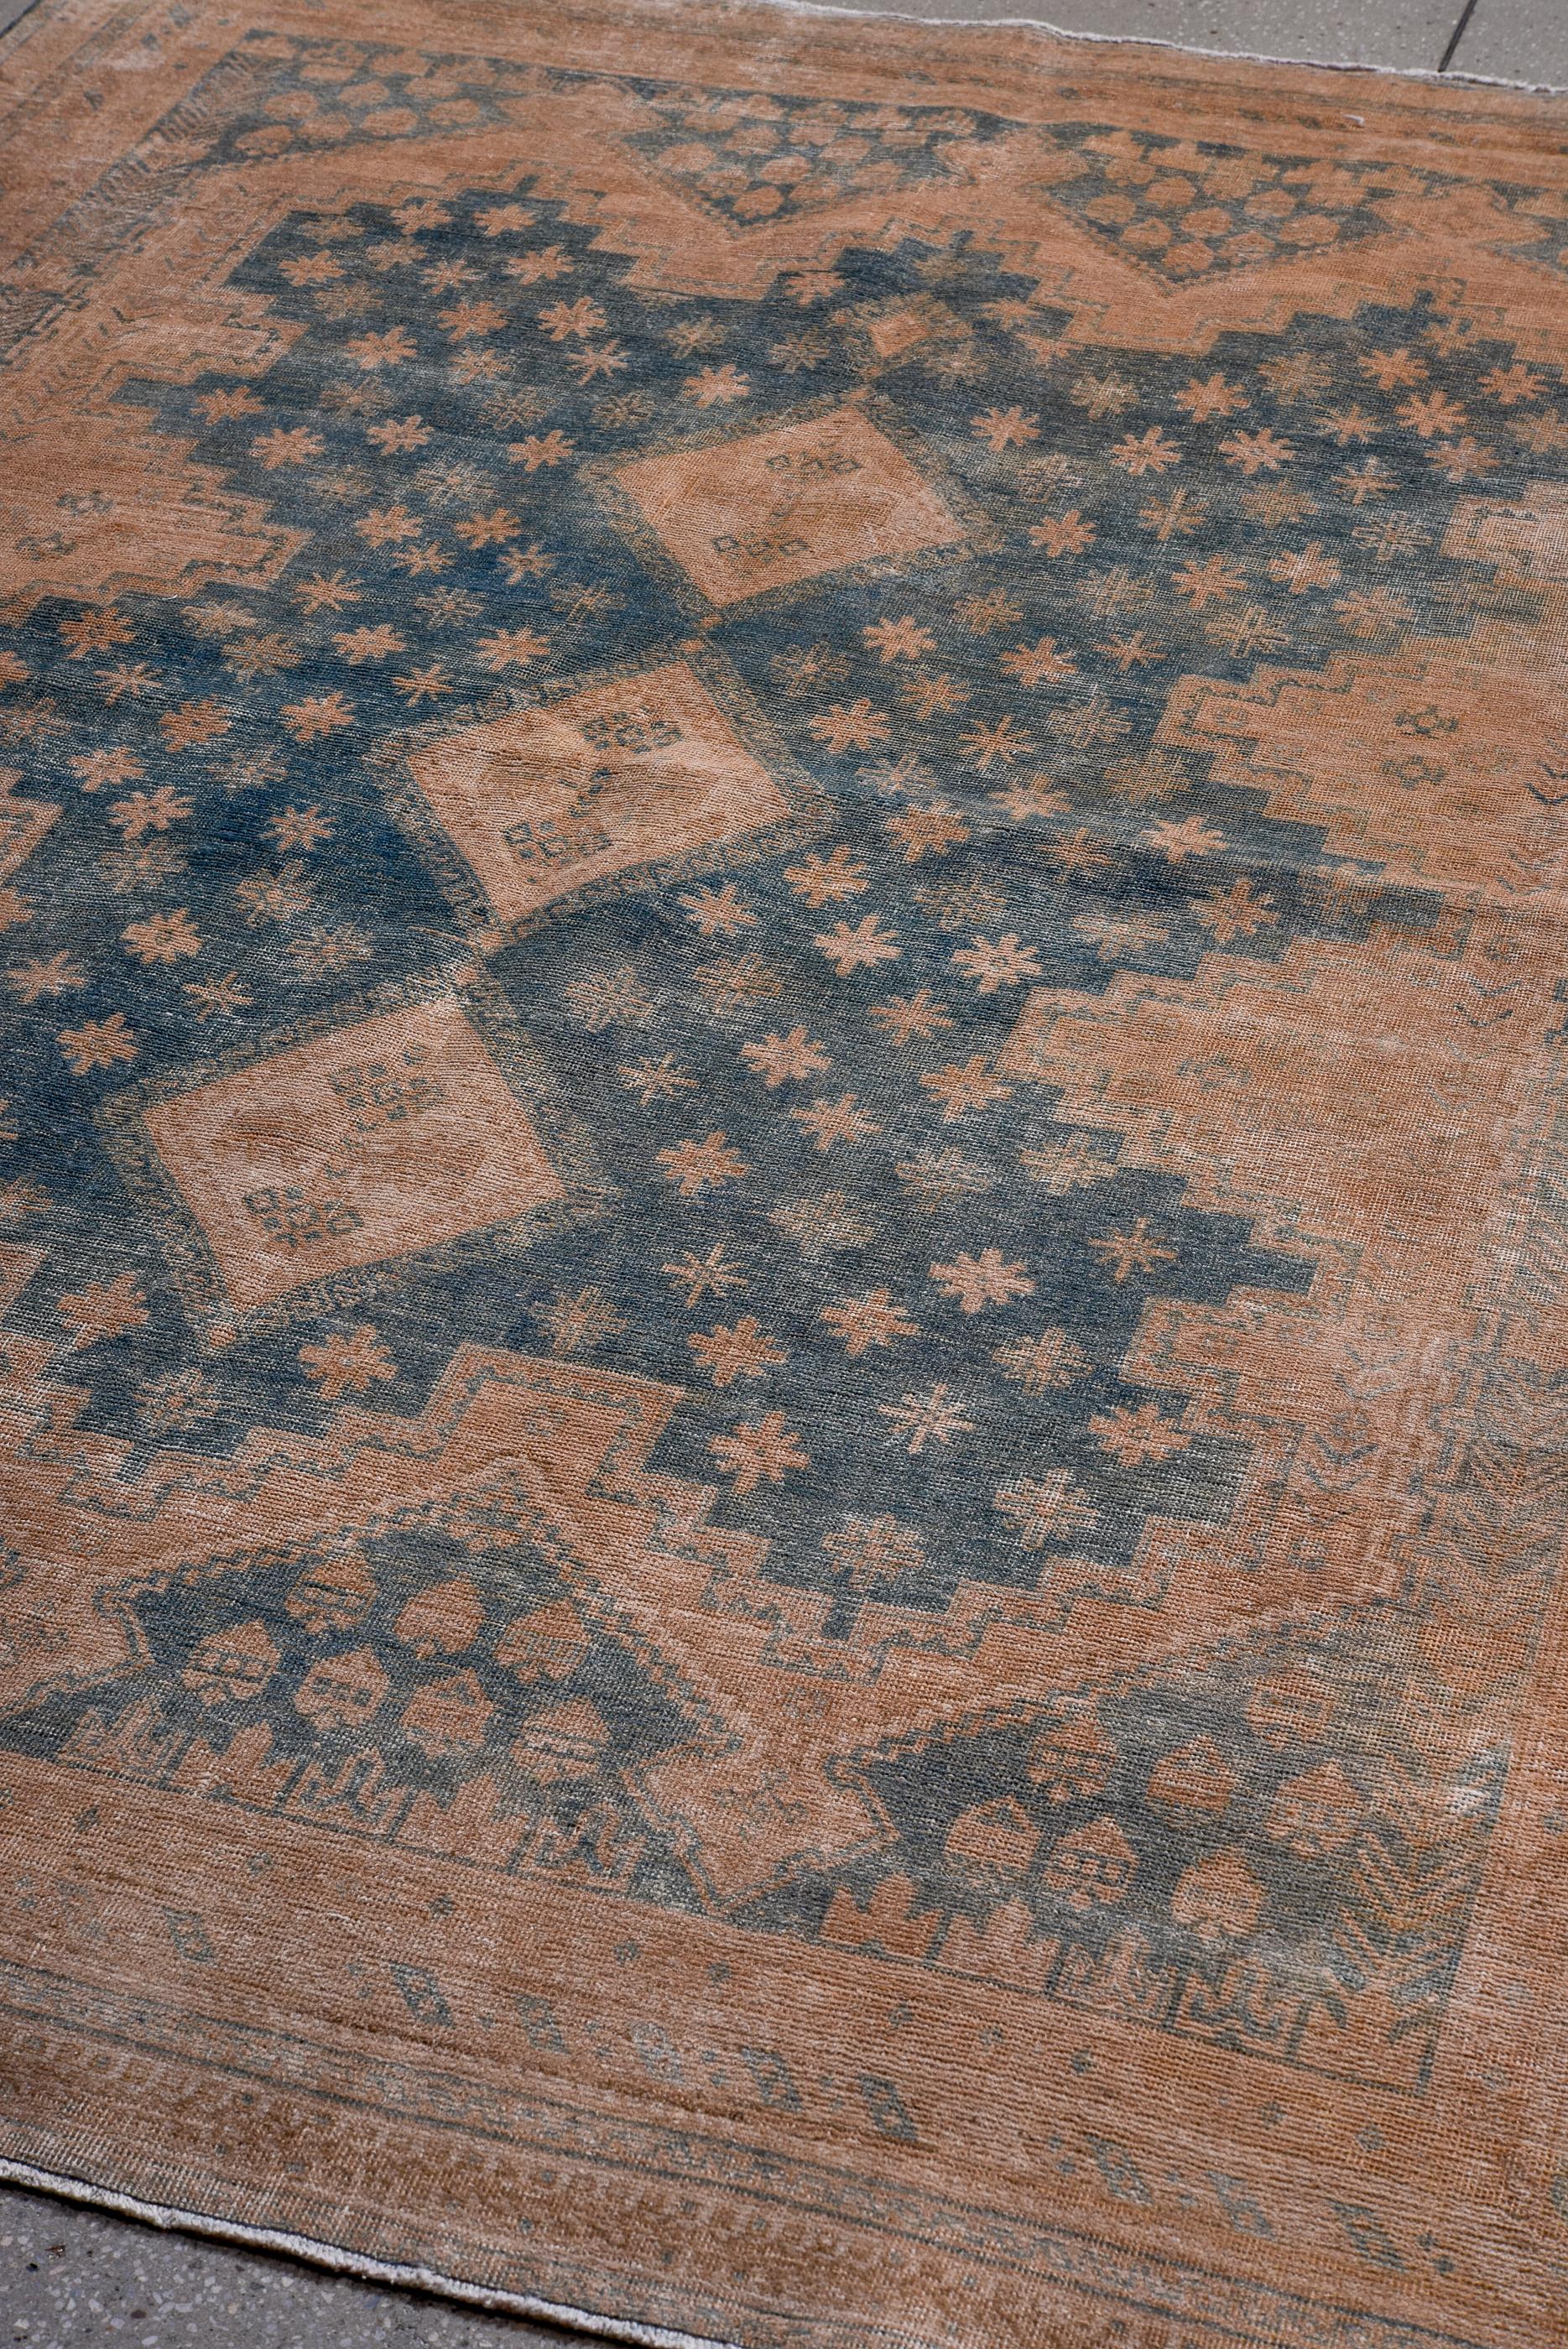 Wool Antique Afshar Rug - Faded Orange and Deep Sea Blue For Sale